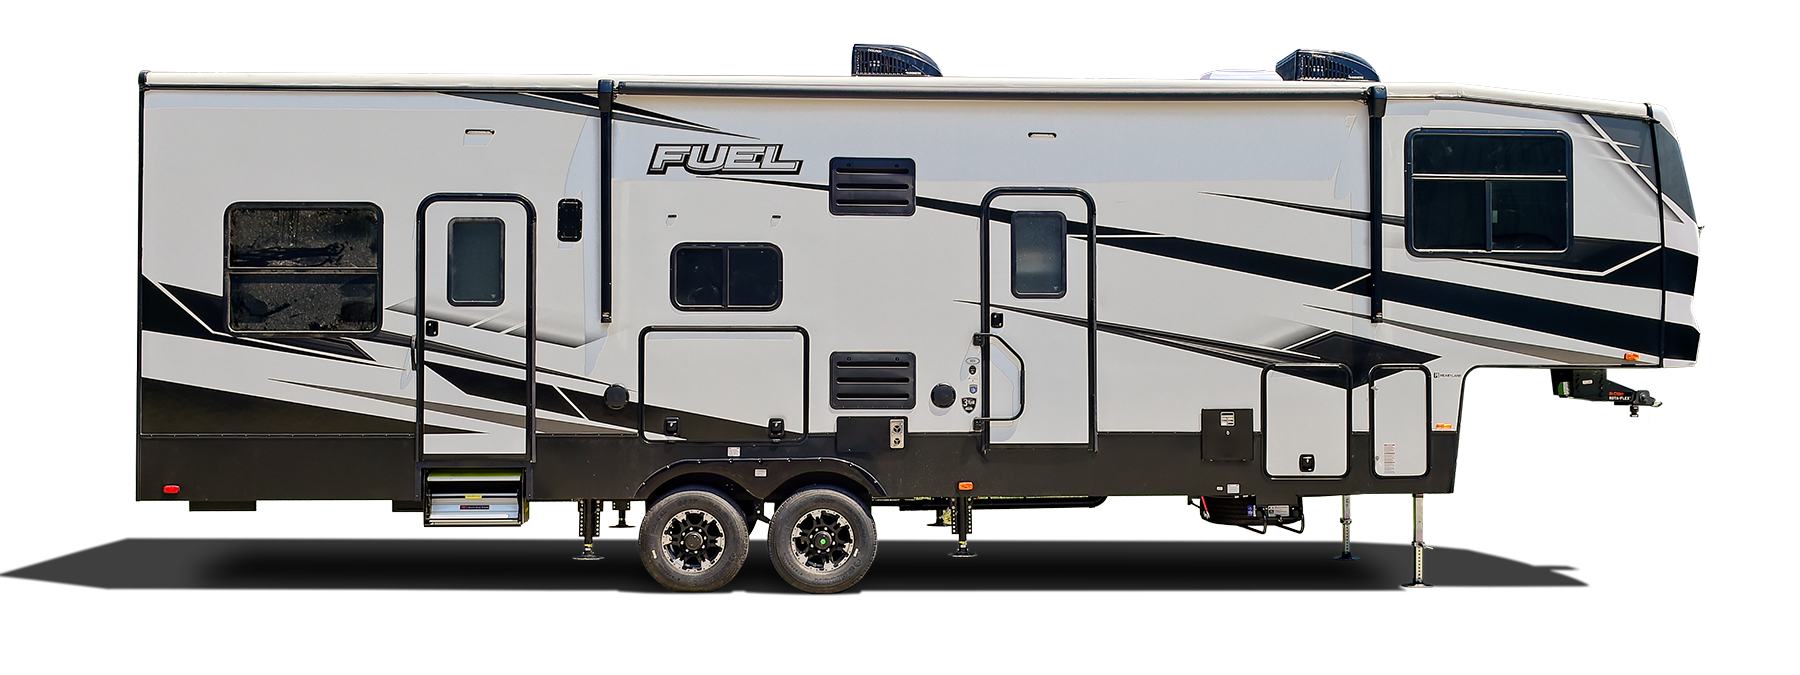 2023 HEARTLAND Fuel - 395 for sale in the Pompano Beach, FL area. Get the best drive out price on 2023 HEARTLAND Fuel - 395 and compare.